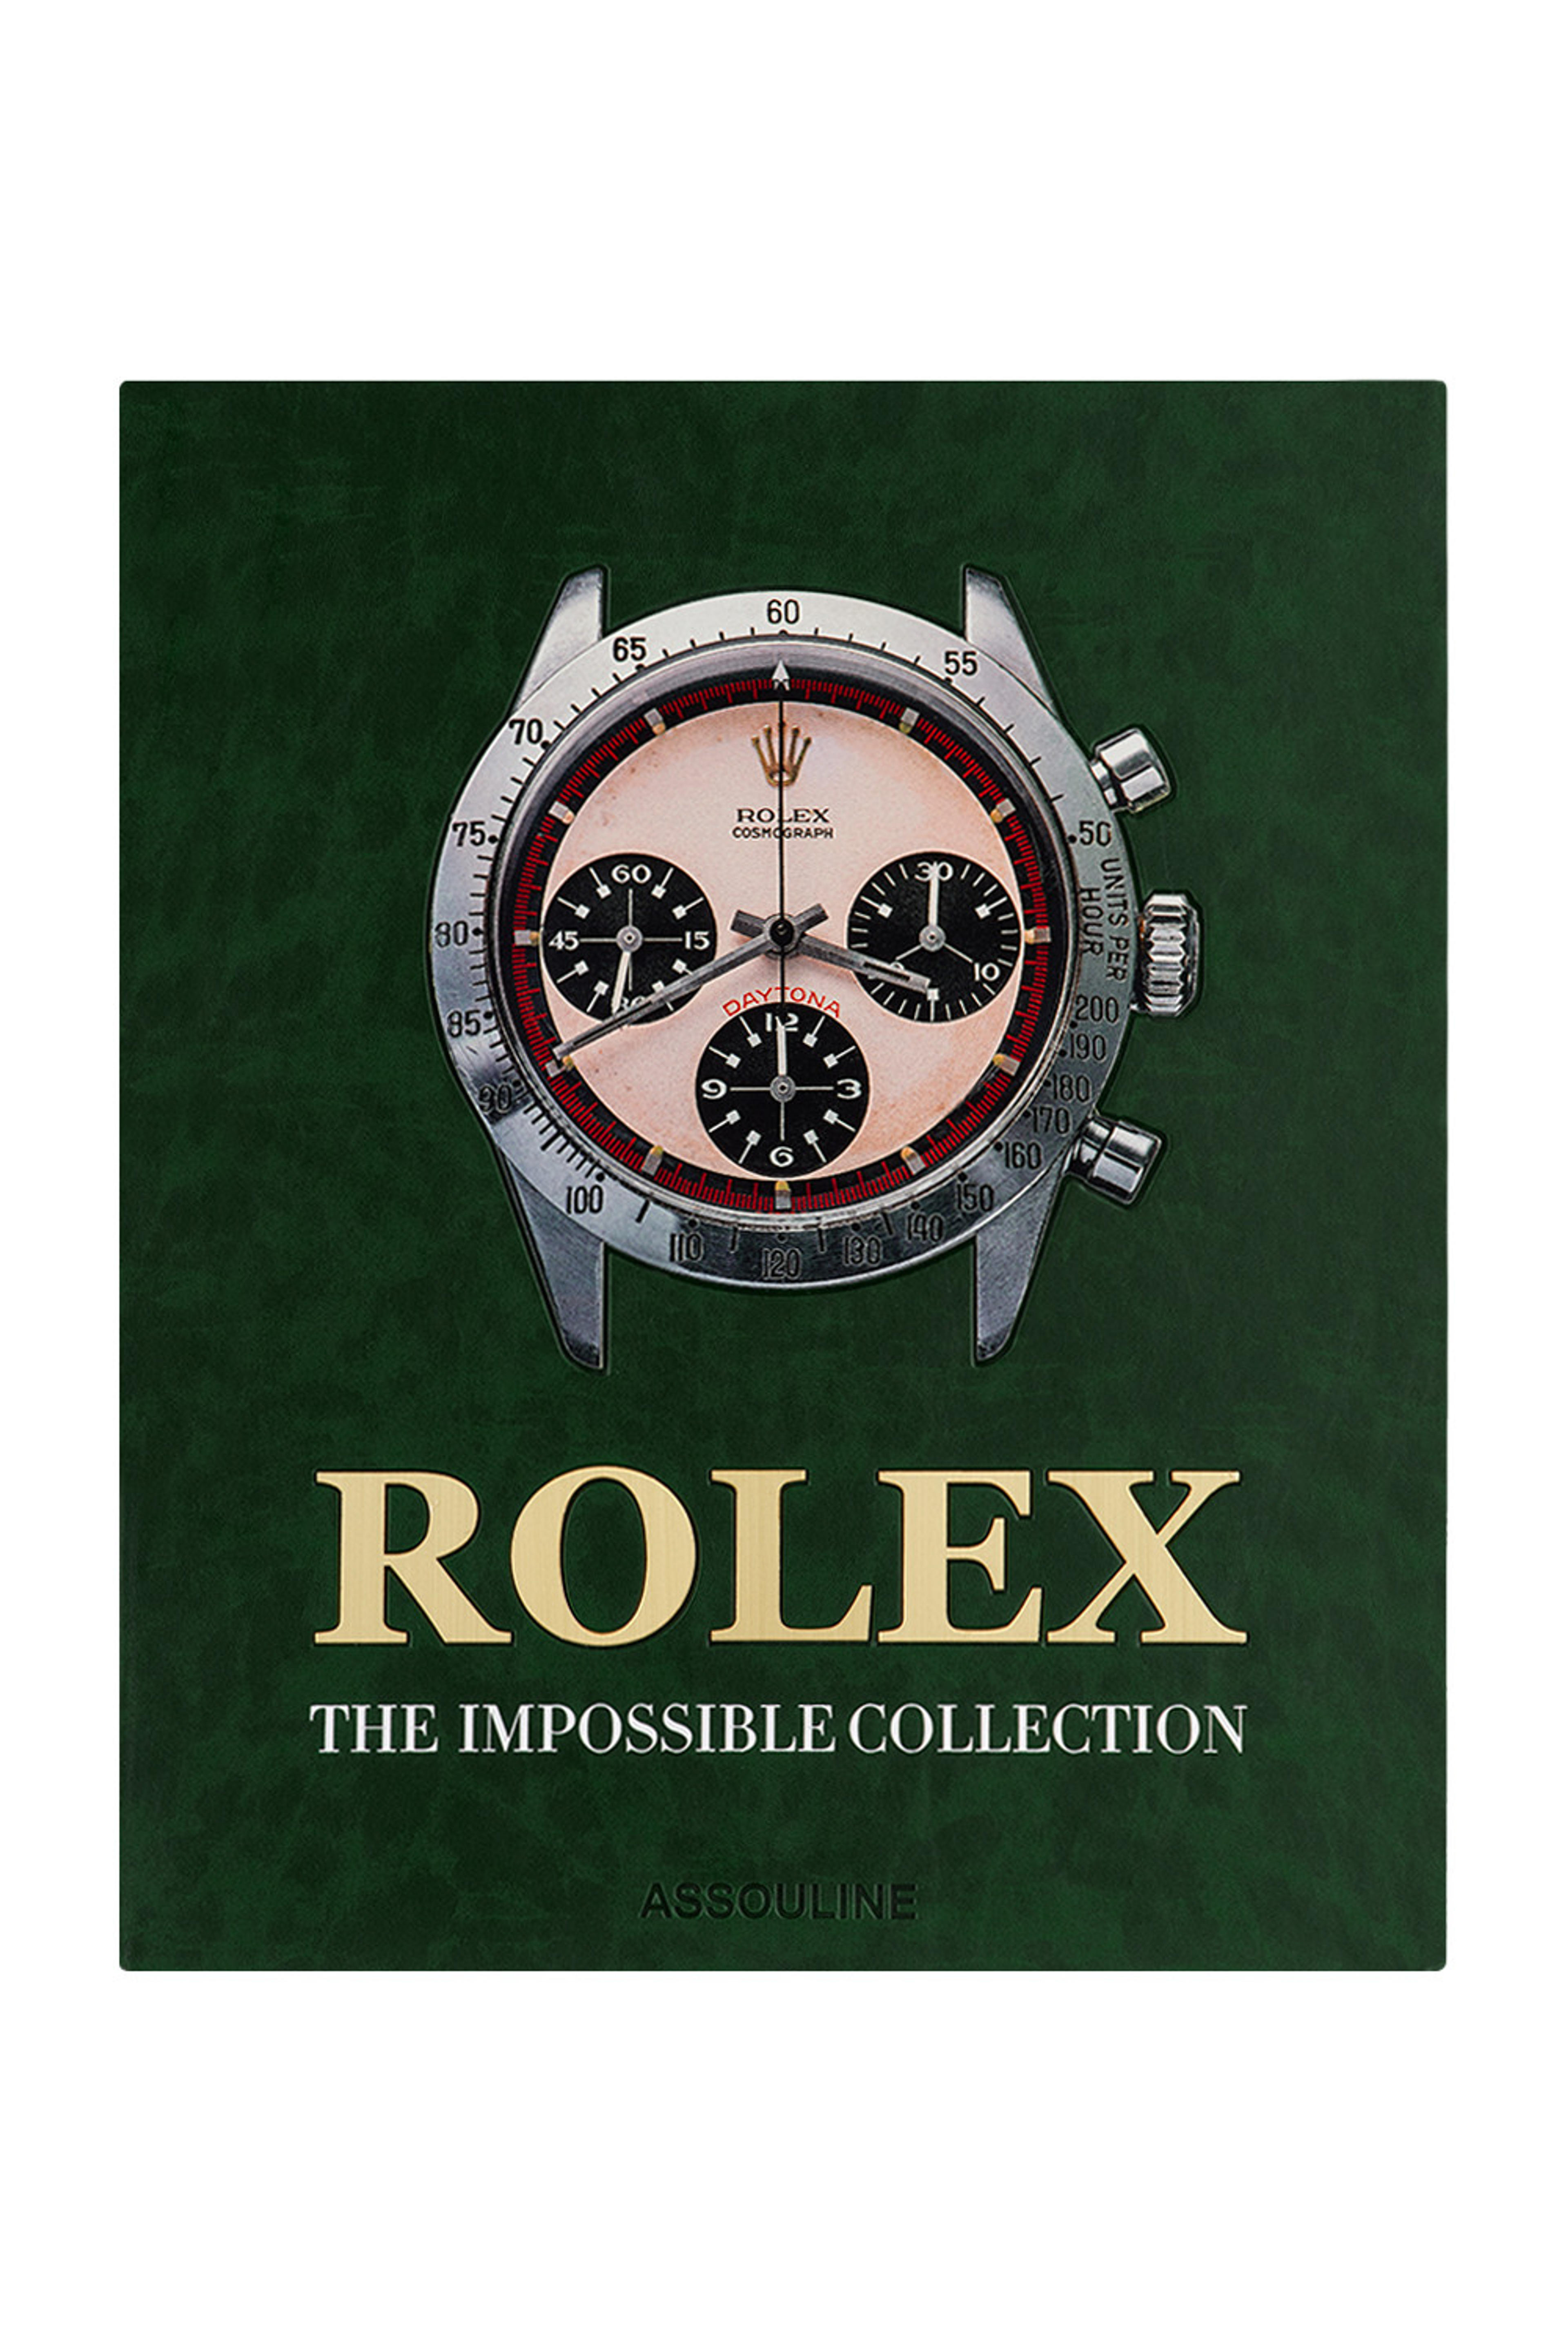 Rolex: The Impossible Collection by Assouline | SSENSE